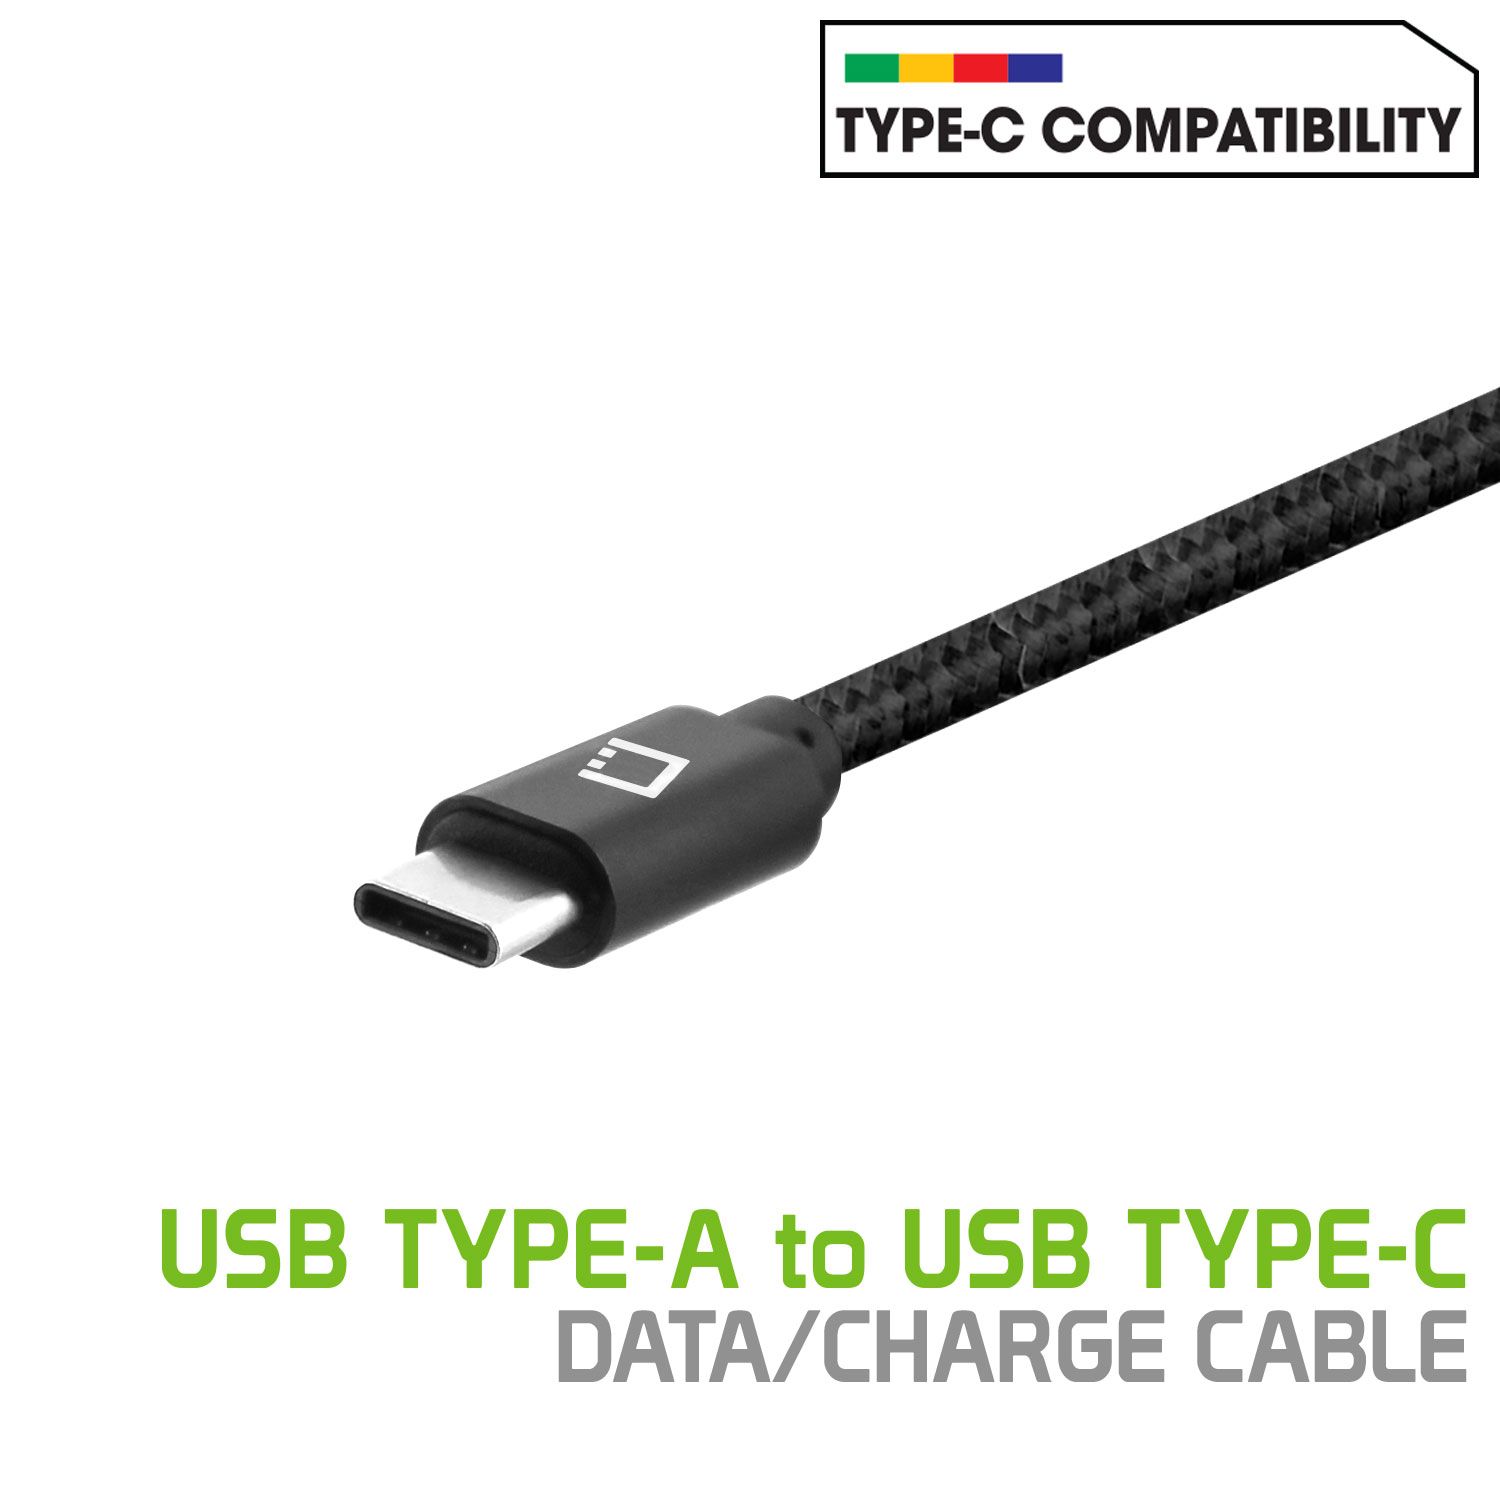 Cellet USB Cable Compatible with LG Q70, Heavy Duty Braided USB Type C (USB-C to USB-A) Fast Charging Sync Cable (4 feet/1.2 meters) and Atom Wipe - image 2 of 8